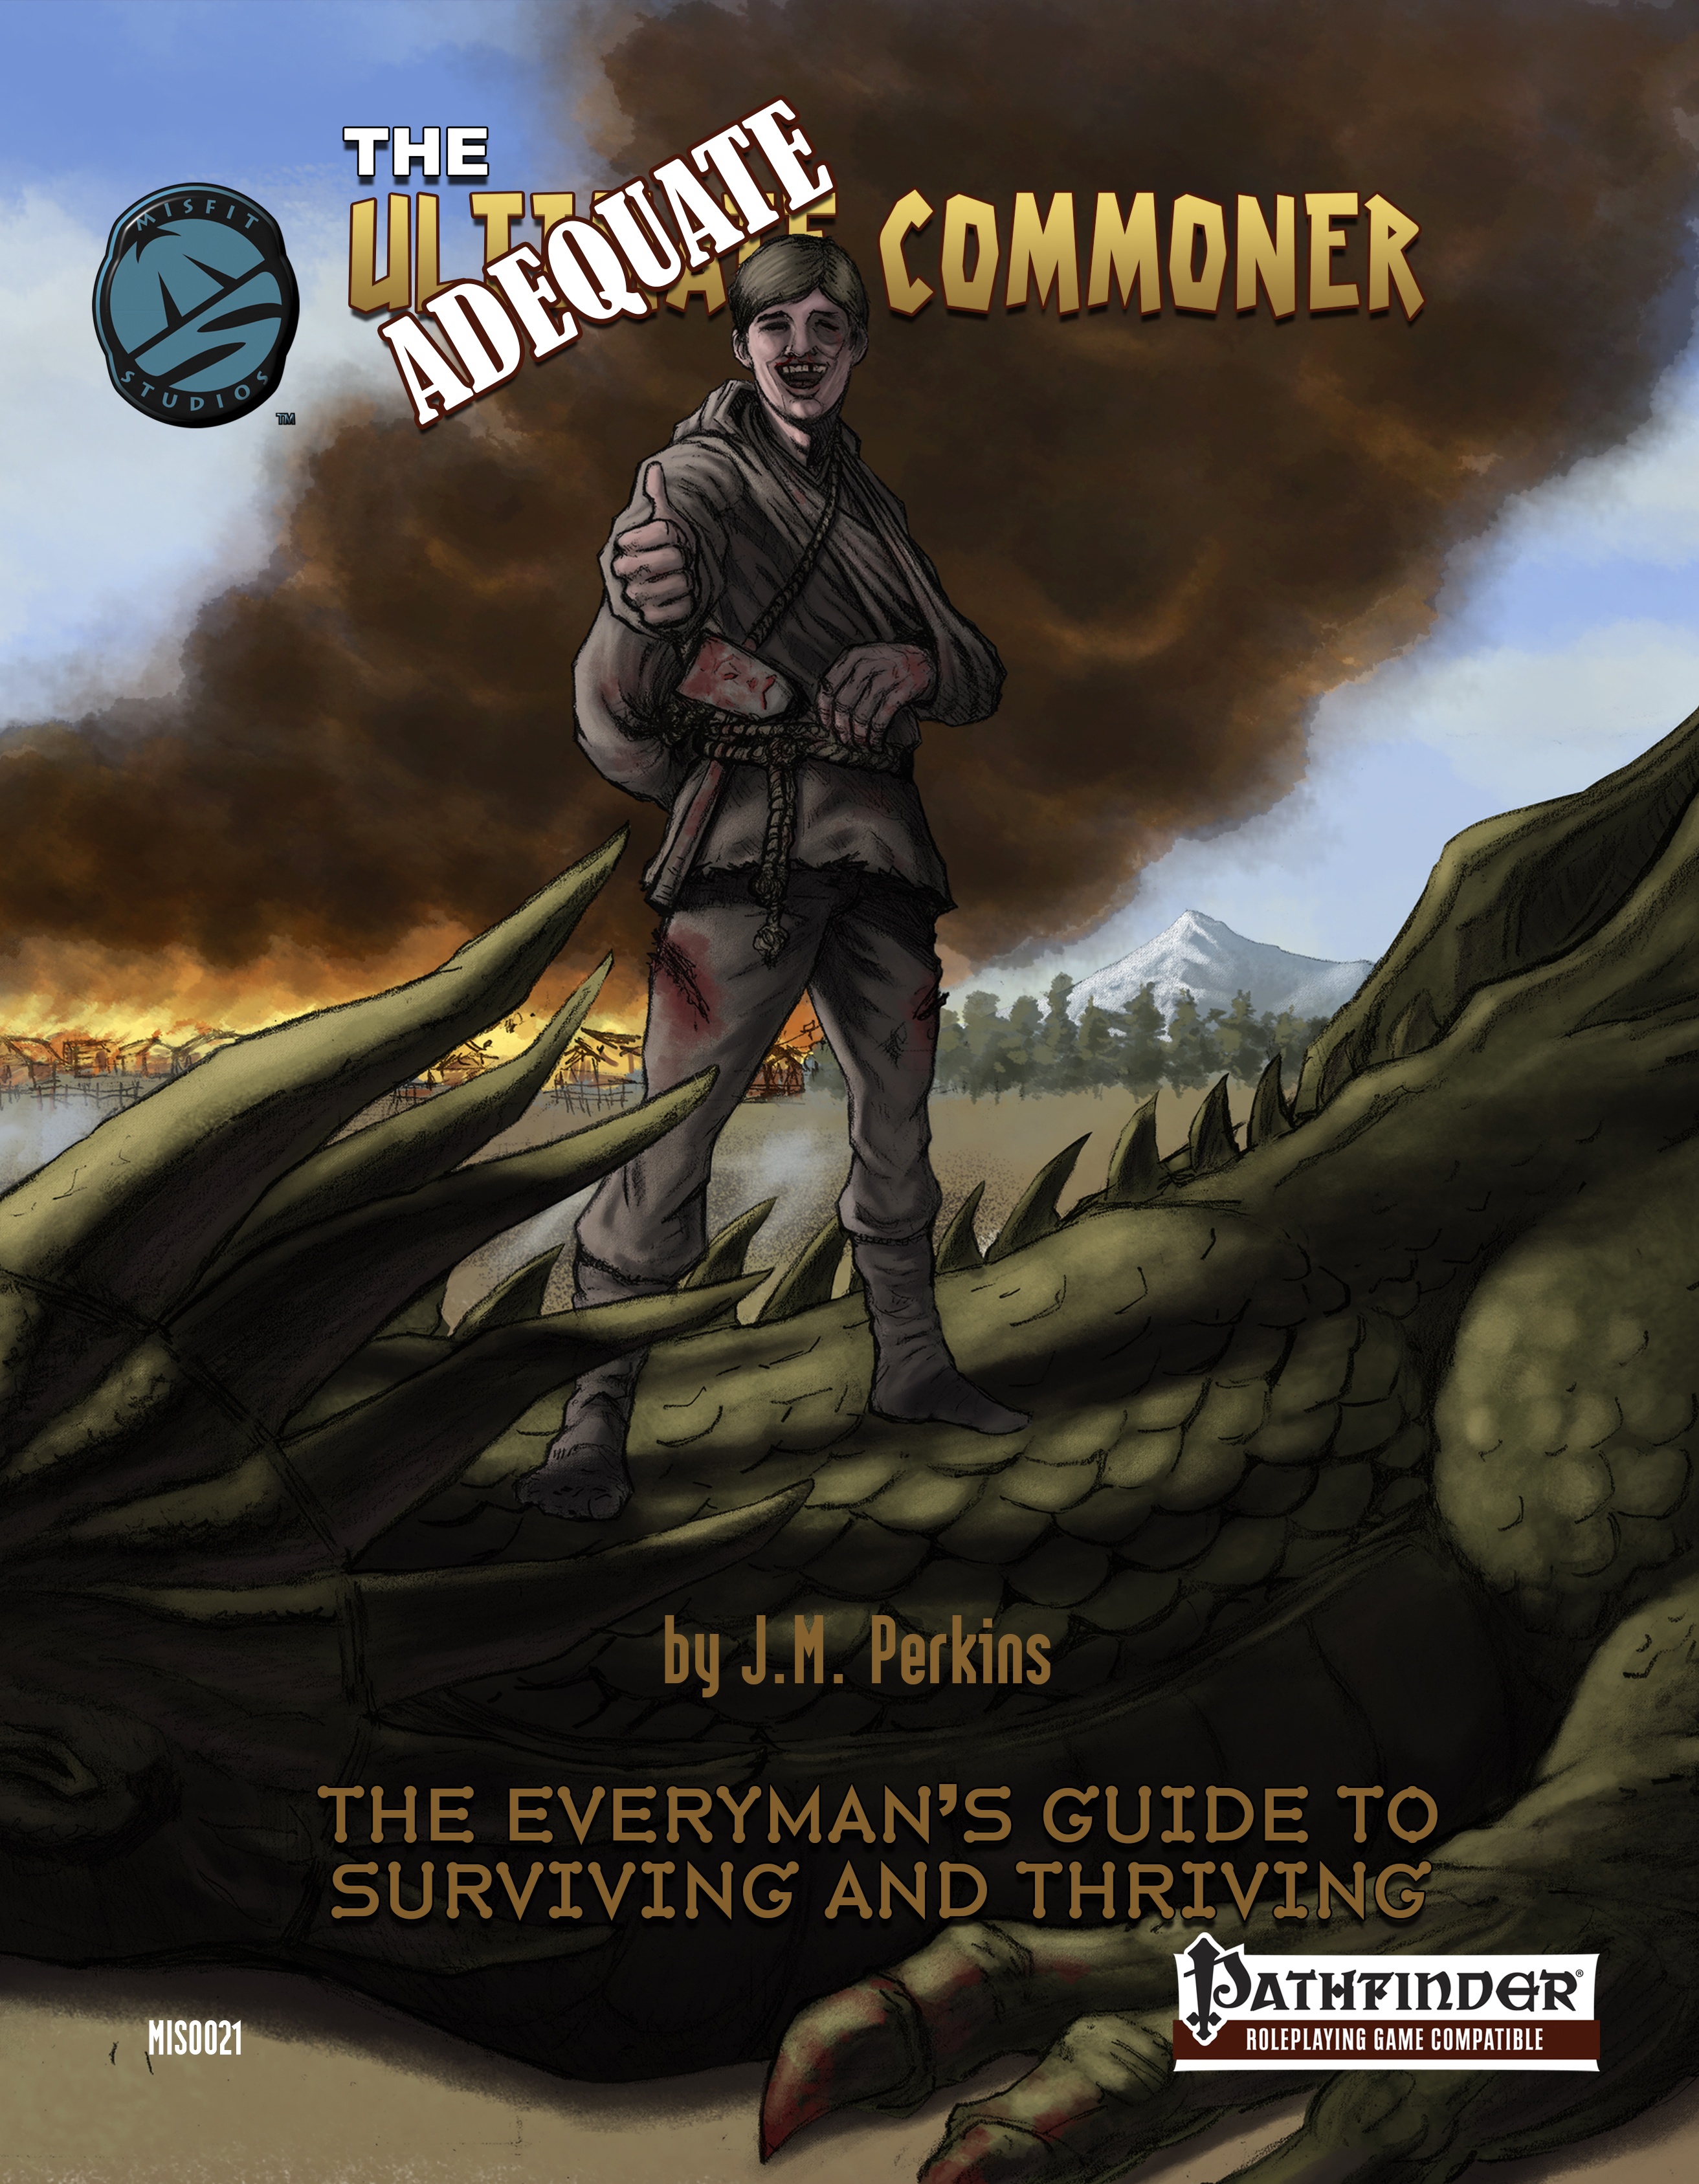 The Adequate Commoner for the Pathfinder RPG